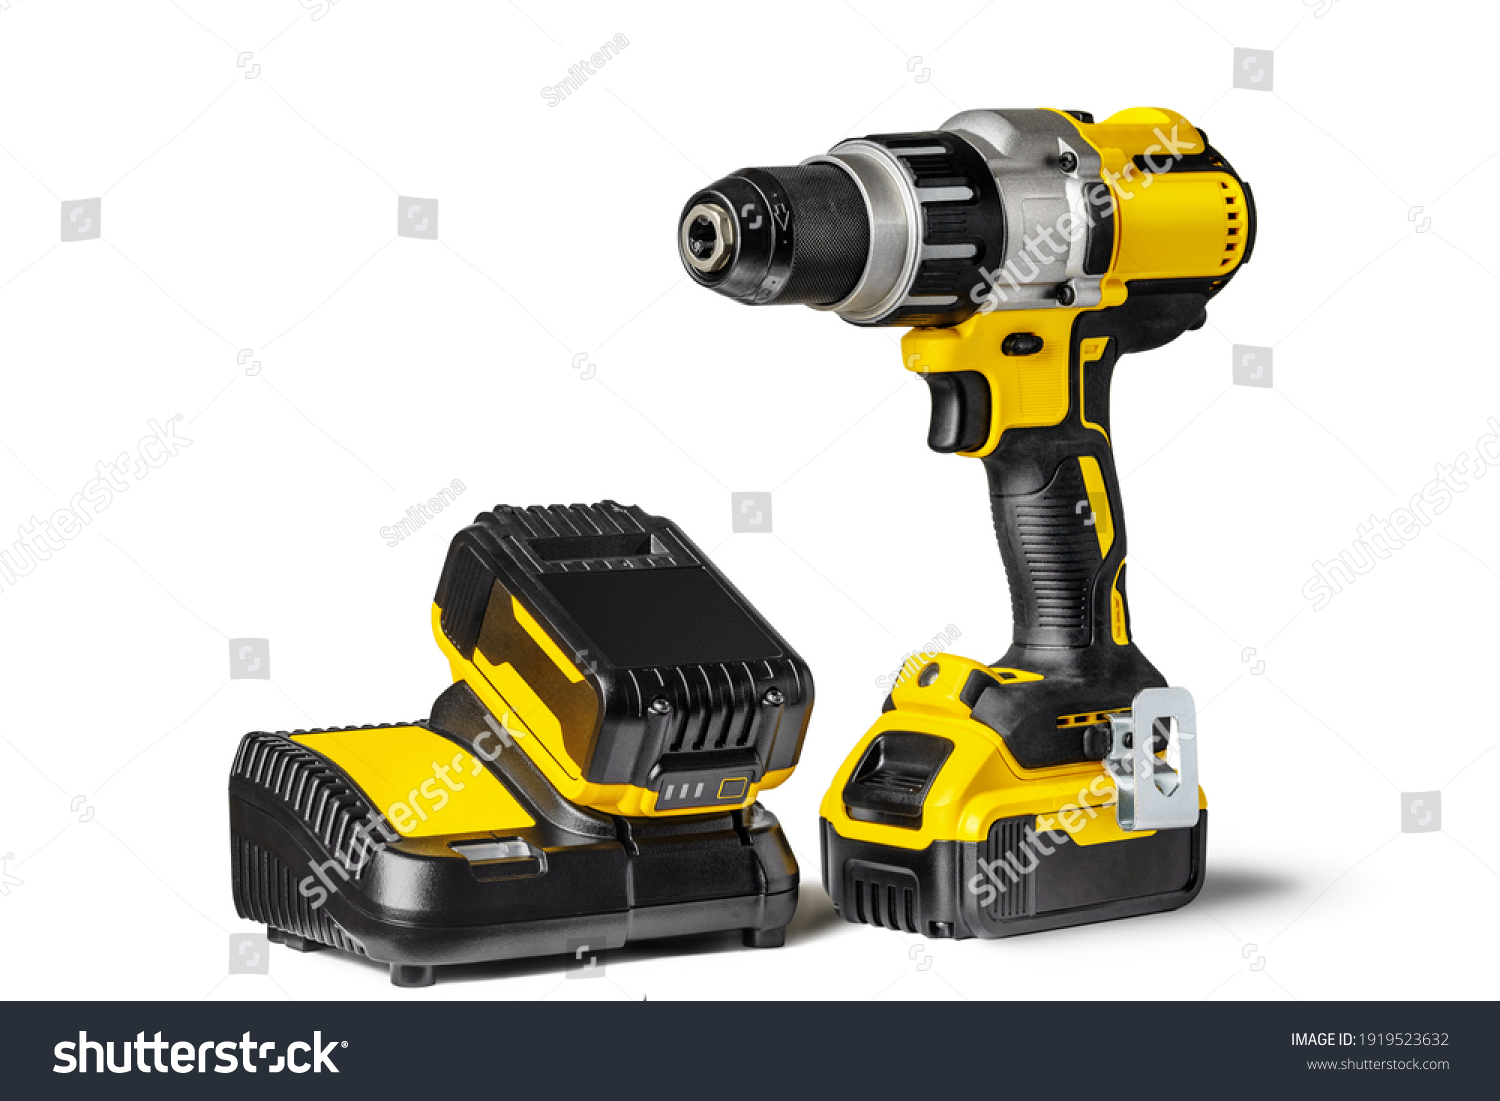 Yellow-black cordless Combi Drill Driver Hammer Drill and extra battery with charger isolated on white background. #1919523632